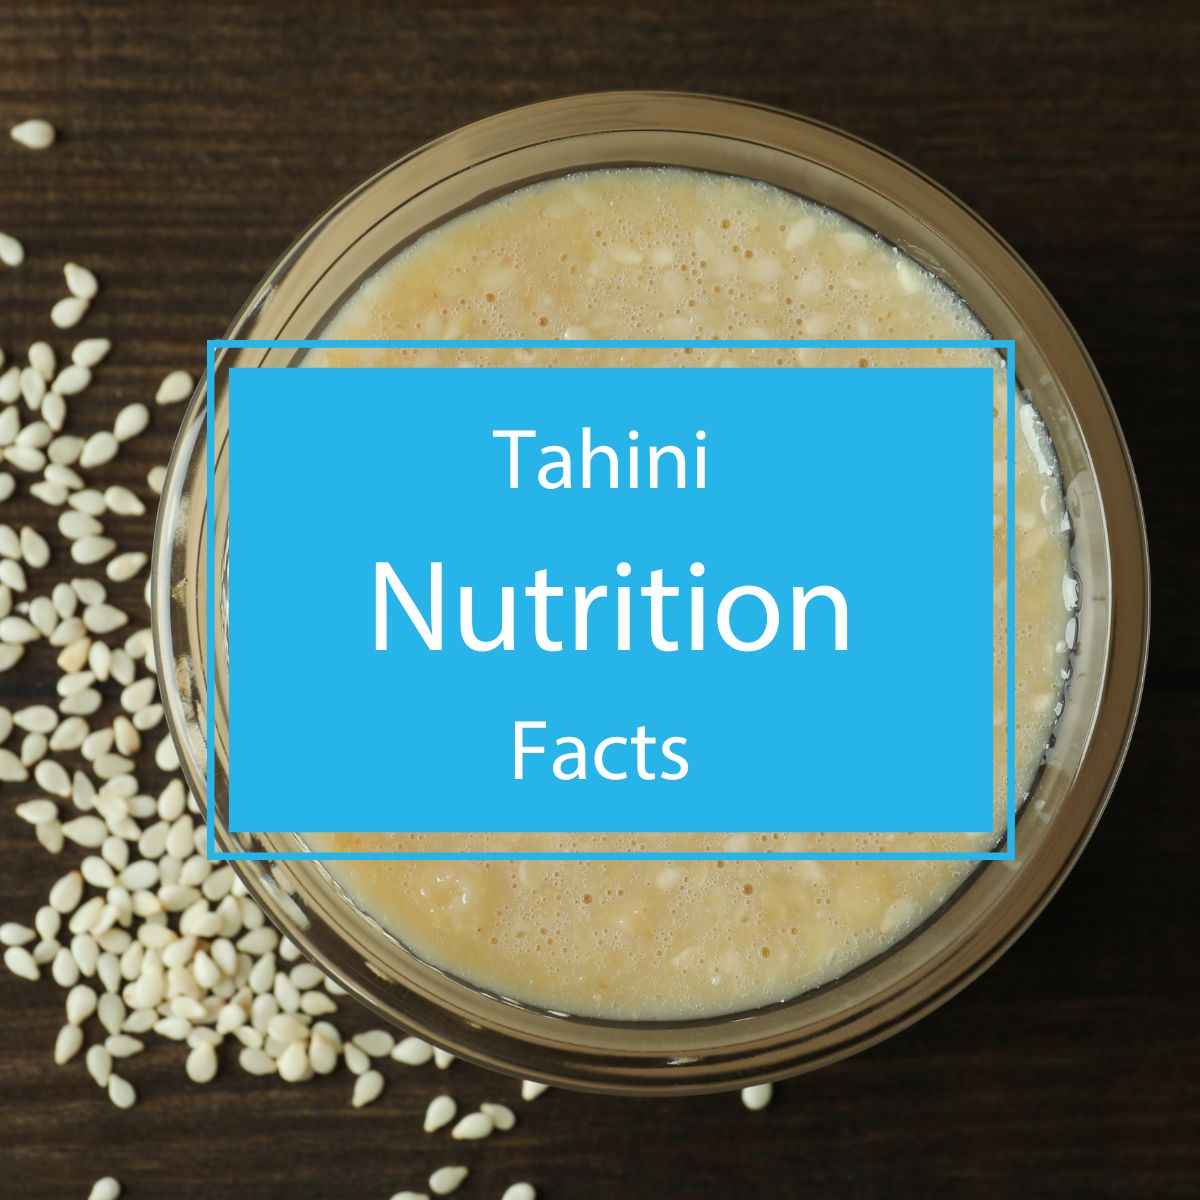 Tahini Nutrition Facts